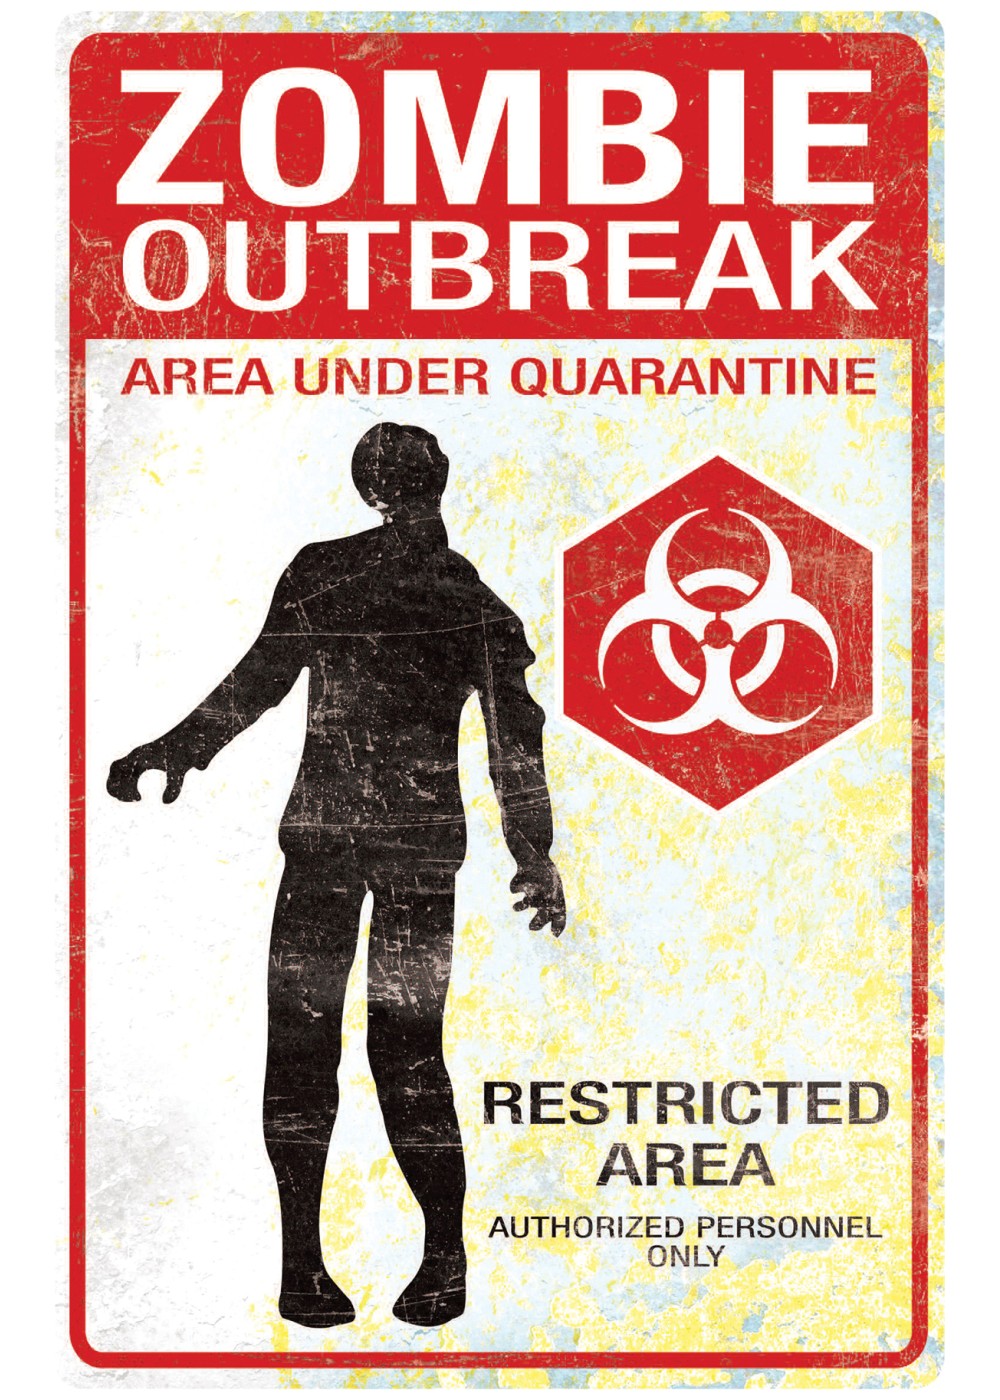 Monster Outbreak free instals